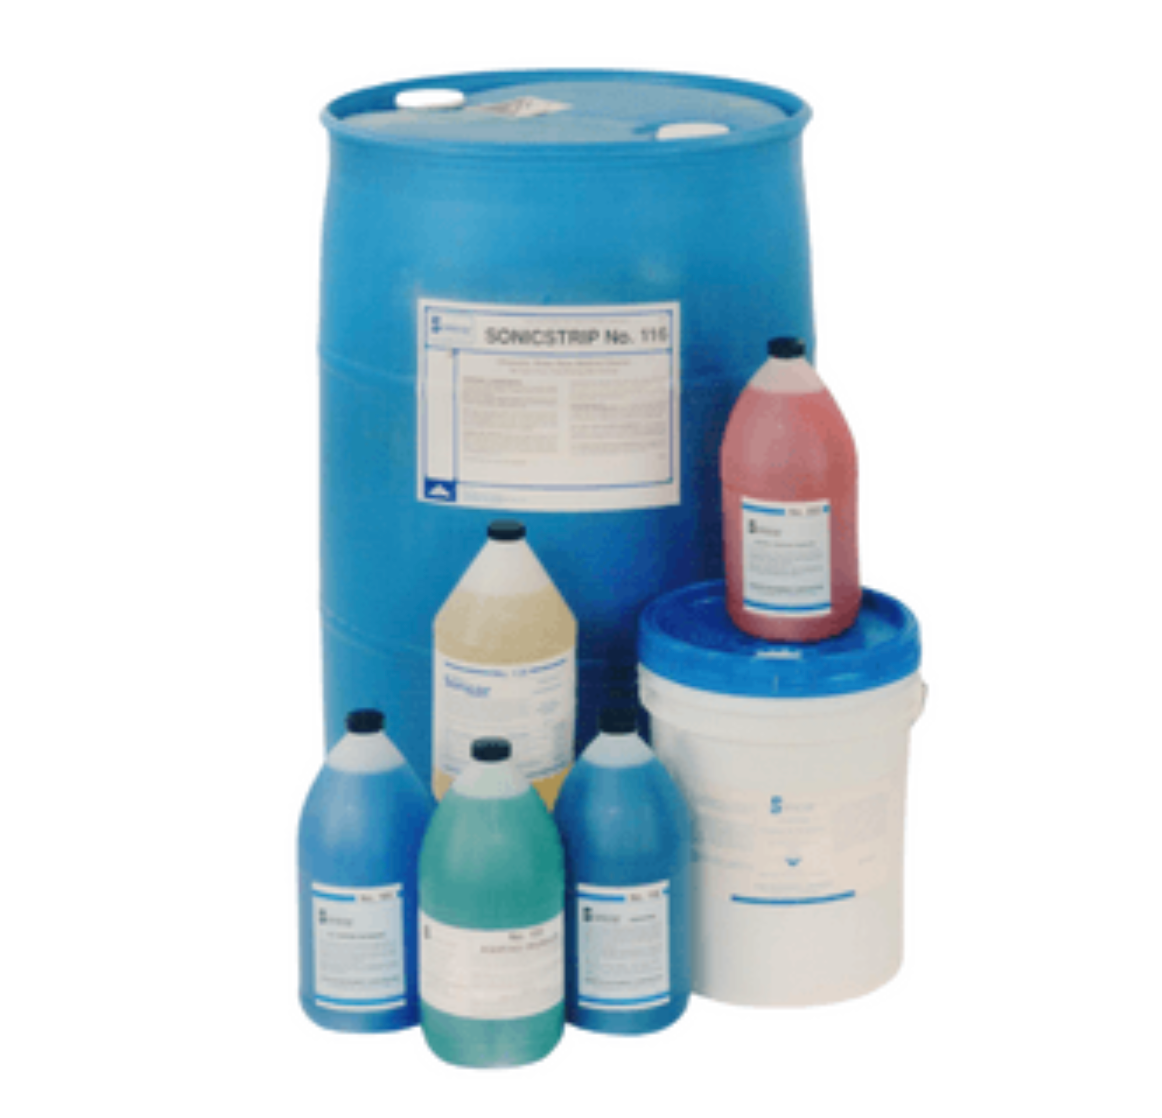 sonicor-sonichem-124-non-caustic-heavy-duty-cleaning-solution-55-gal-drum